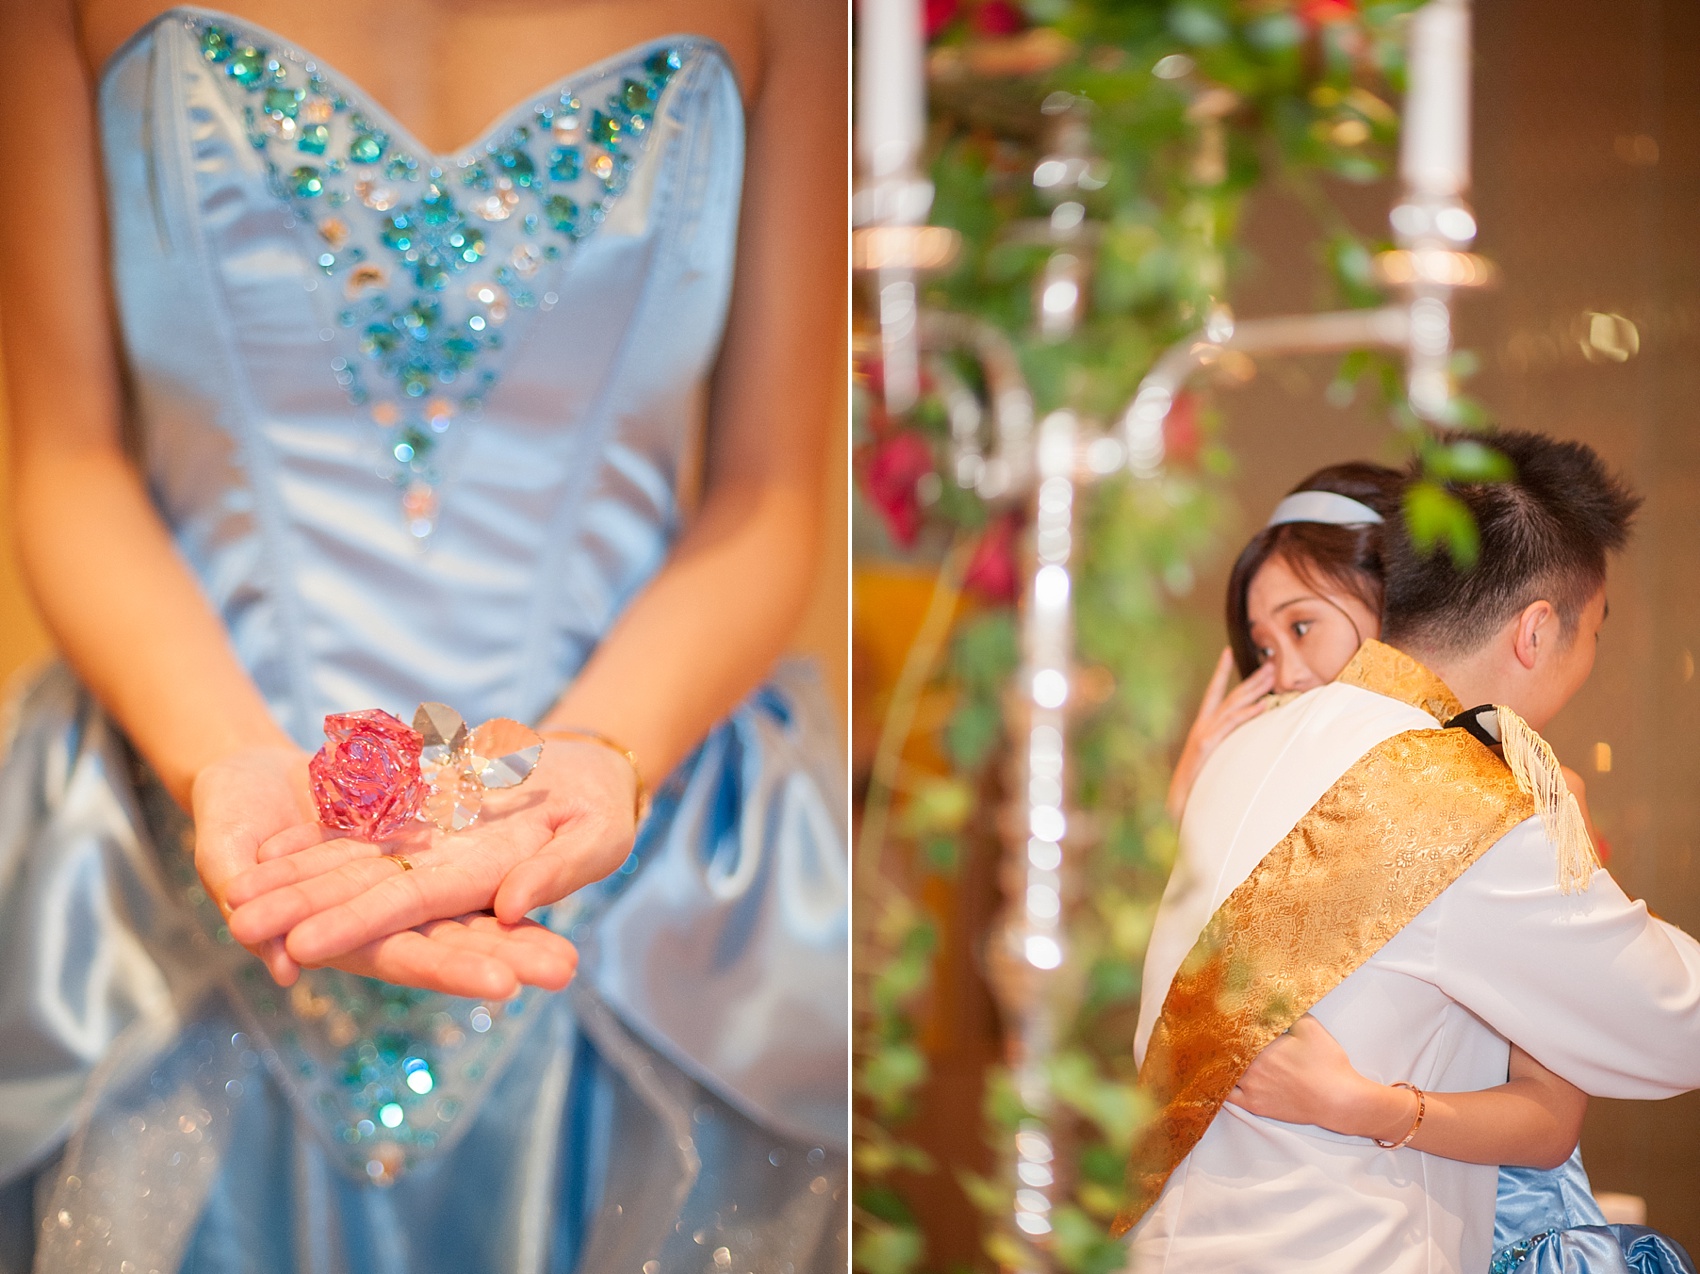 Prince Charming and Cinderella for a Disney proposal at Le Bernadin captured by Mikkel Paige, New York City wedding photographer. Coordination by Brilliant Event Planning.